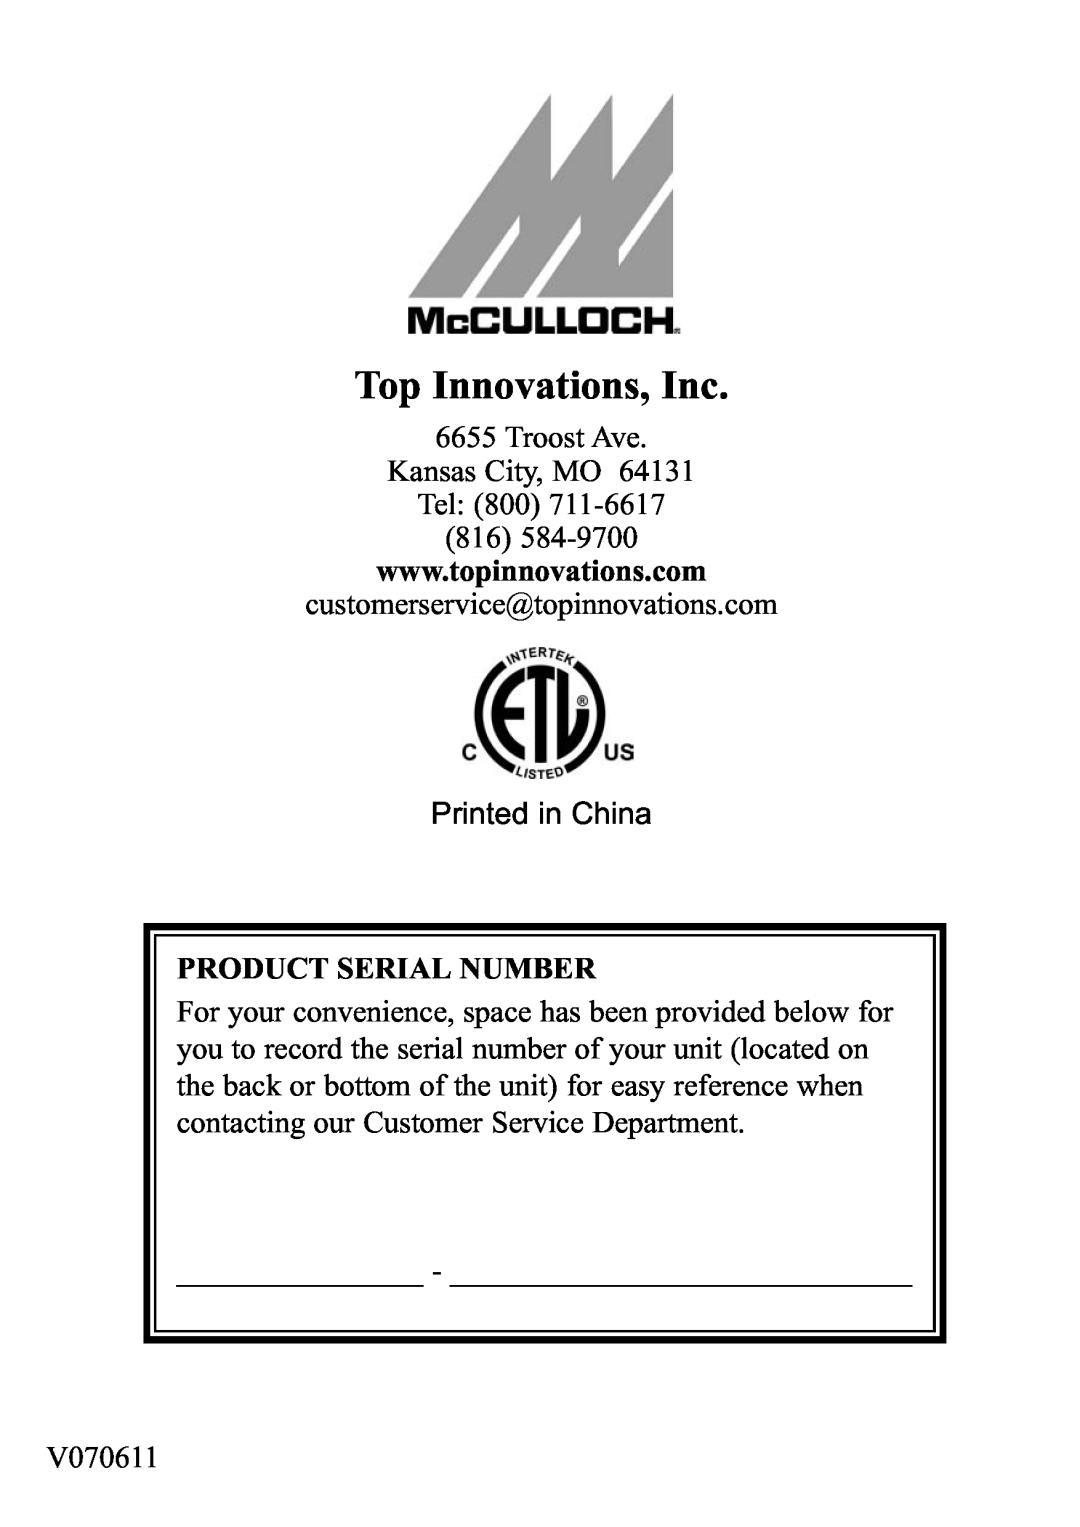 Top Innovations MC1246 warranty Product Serial Number, Top Innovations, Inc 